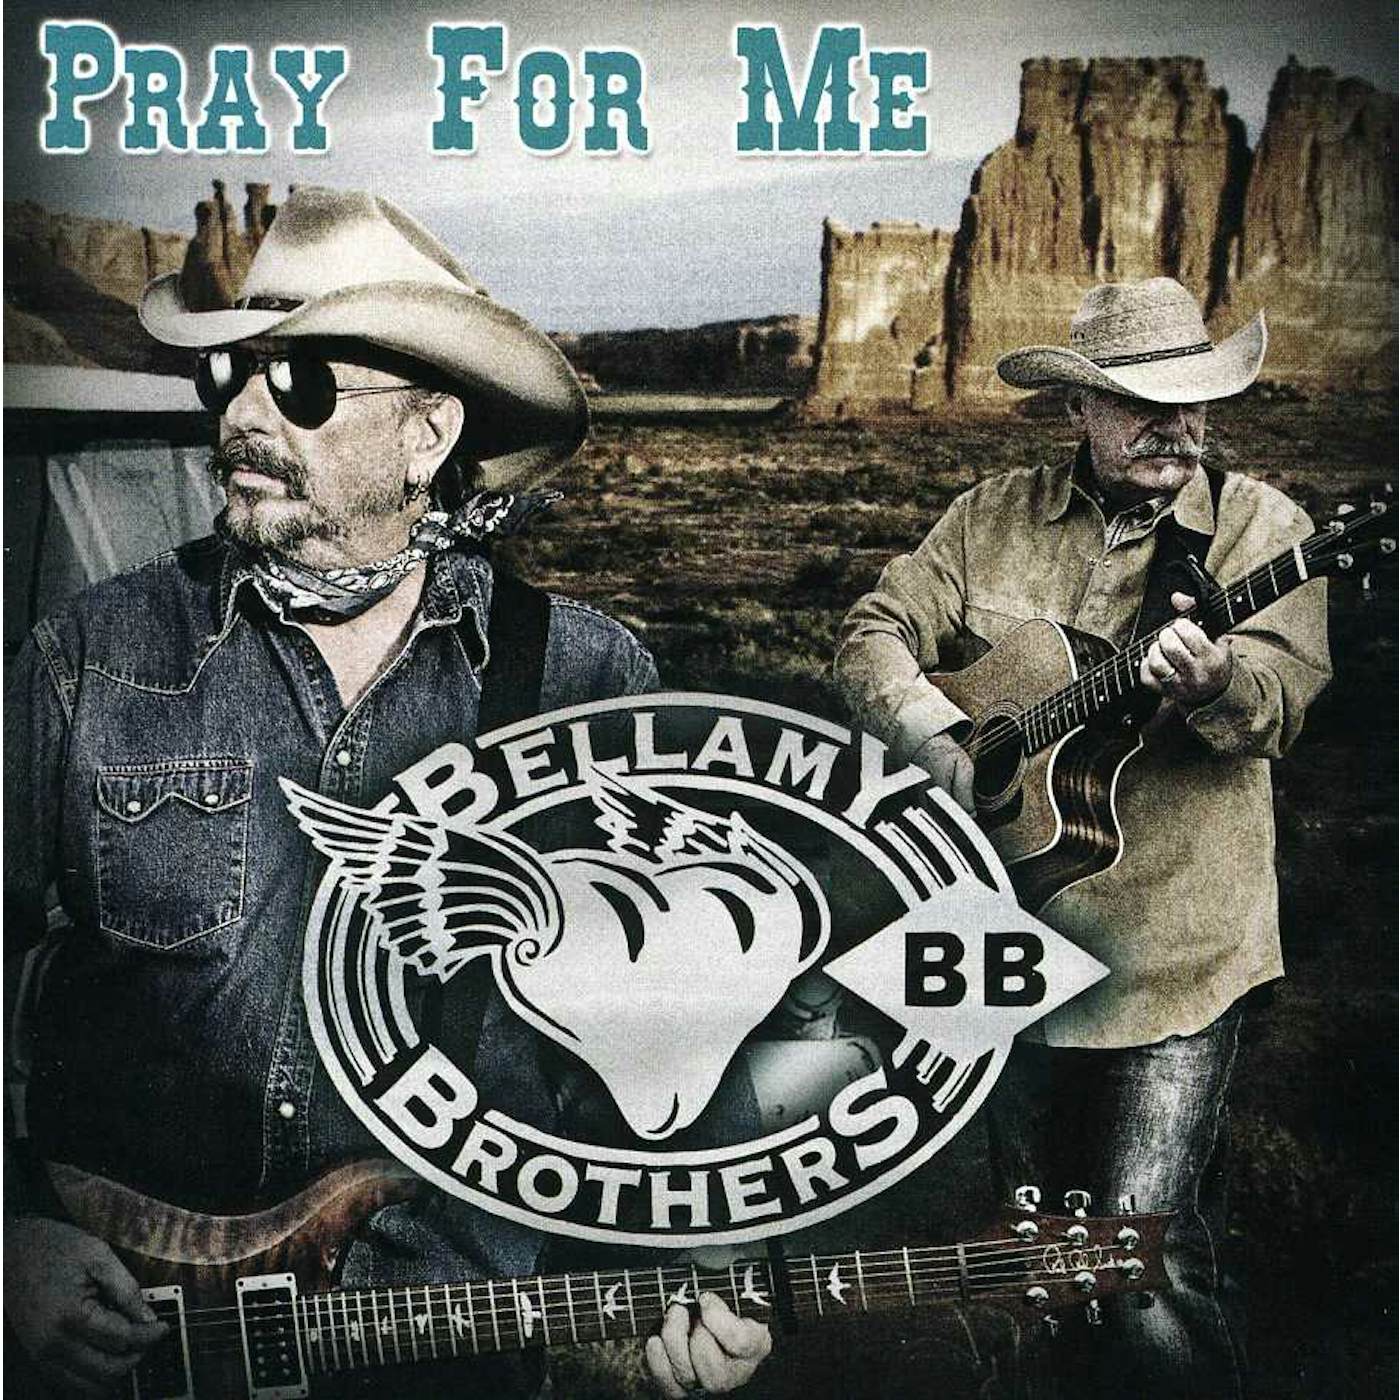 The Bellamy Brothers PRAY FOR ME CD